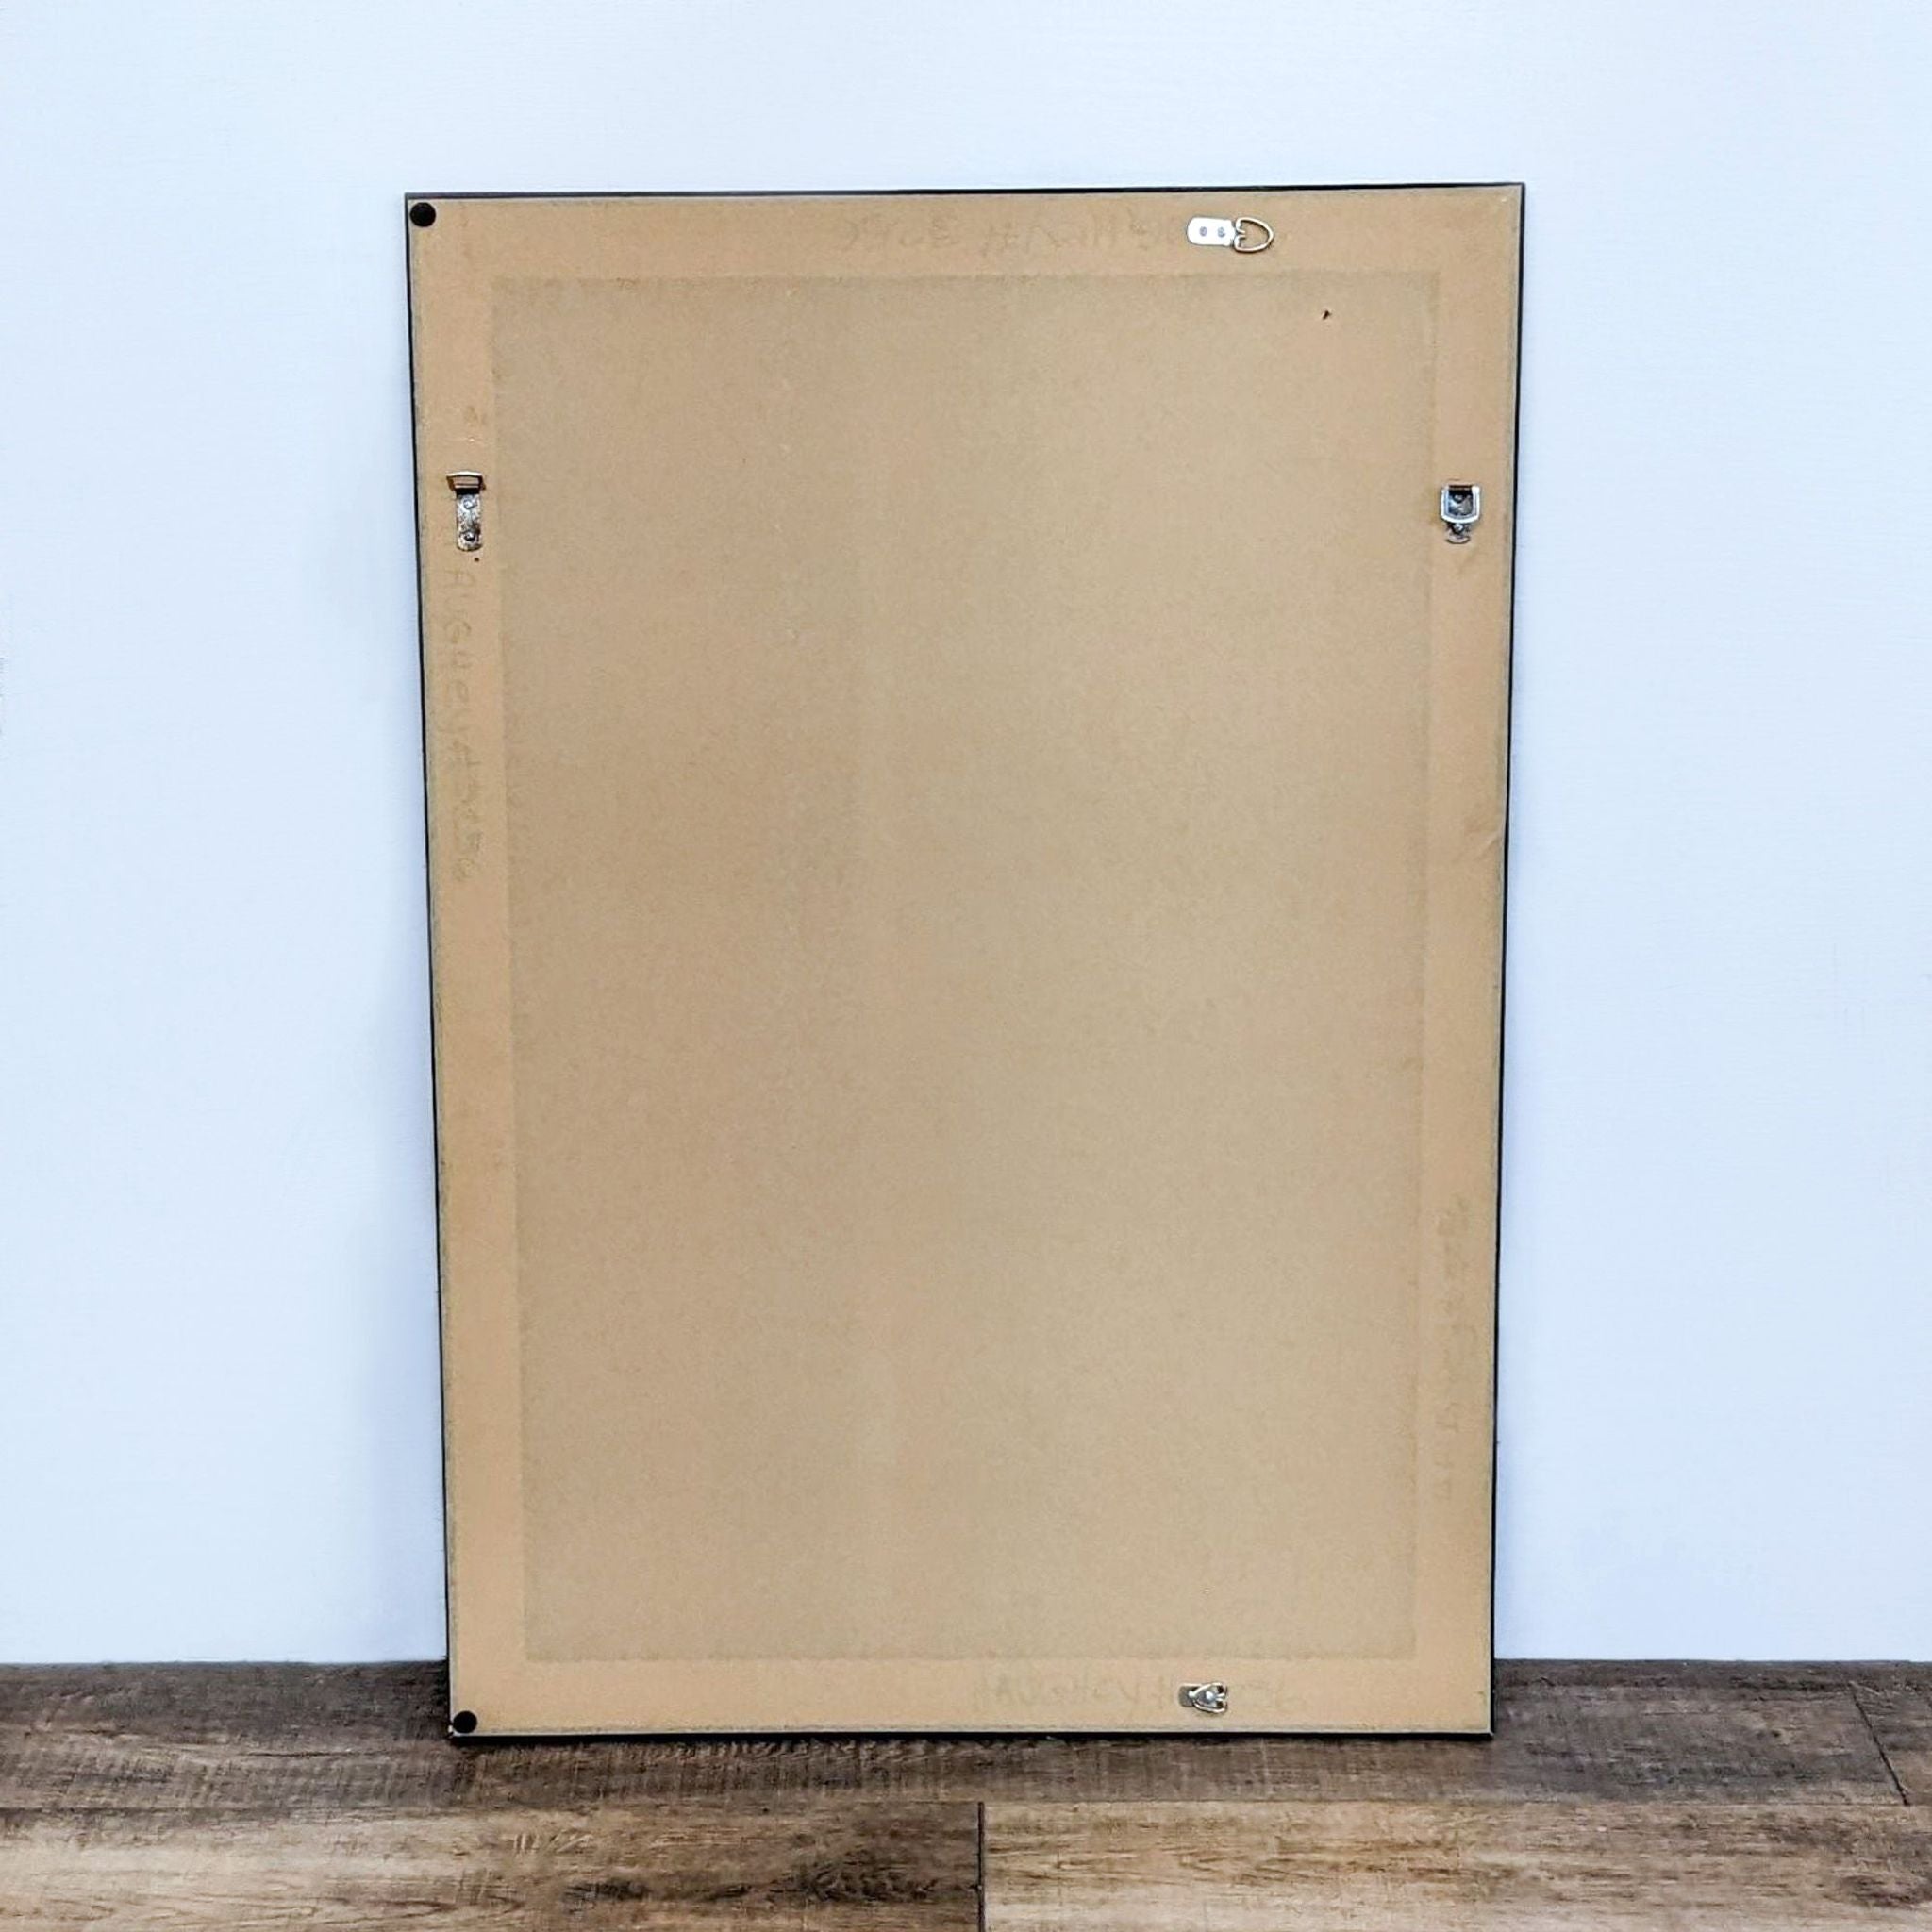 Rear view of Reperch wall mirror with brown backing, metal mounts, and label.